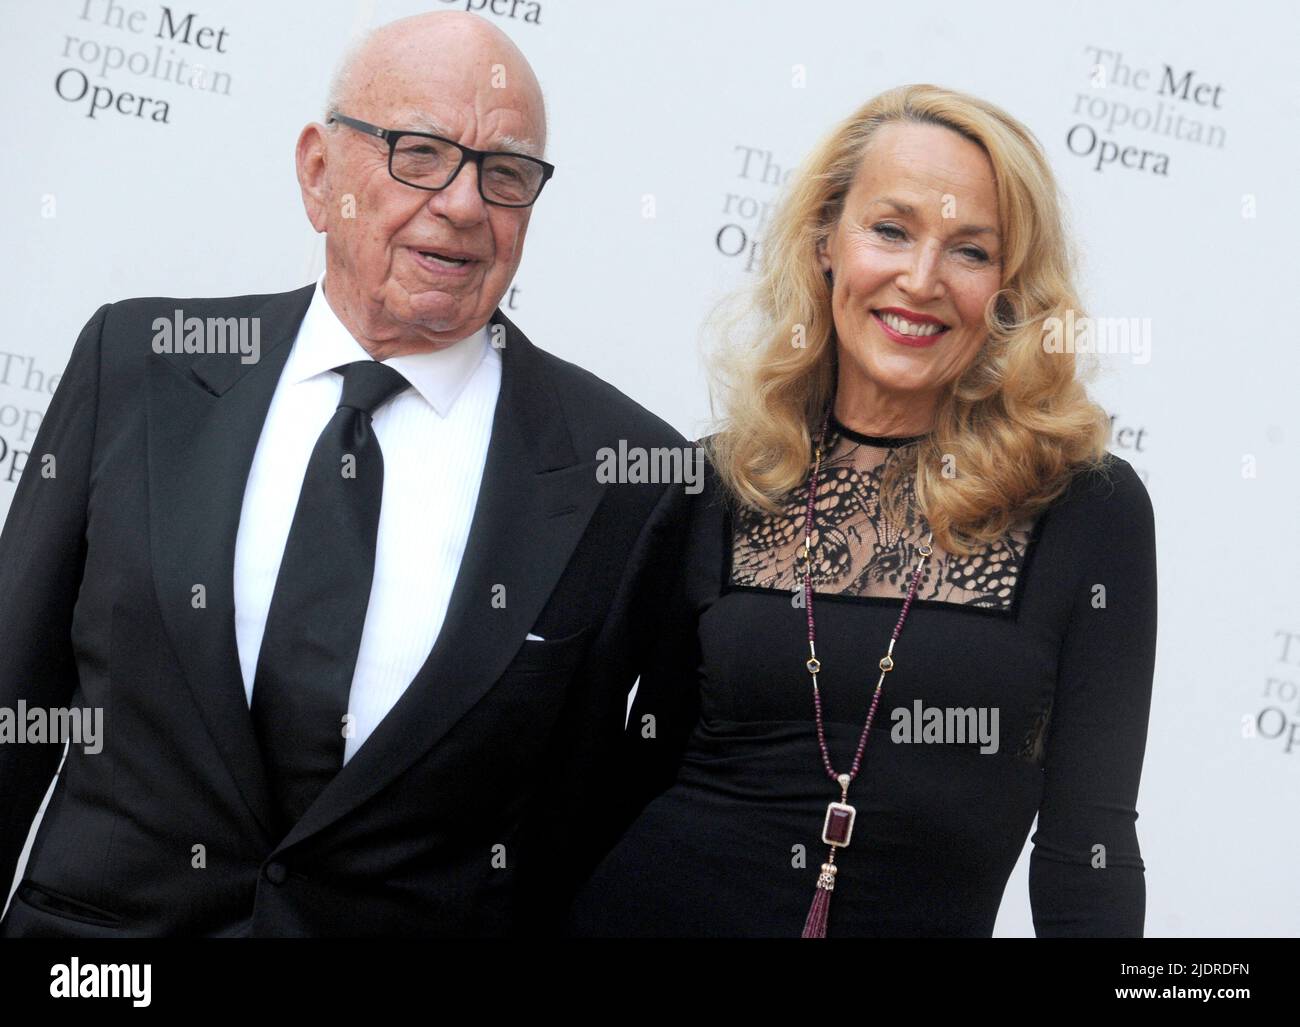 File photo dated September 25, 2017 of Rupert Murdoch and Jerry Hall attending the 2017 Metropolitan Opera Opening Night at The Metropolitan Opera House in New York City, NY, USA. Media tycoon Rupert Murdoch and model Jerry Hall are getting divorced, the New York Times reported Wednesday, citing two people with knowledge of the matter. It will be the fourth divorce for the 91-year-old Murdoch, who married Hall, 65, in London in March 2016. Photo by Dennis Van Tine/ABACAPRESS.COM Stock Photo